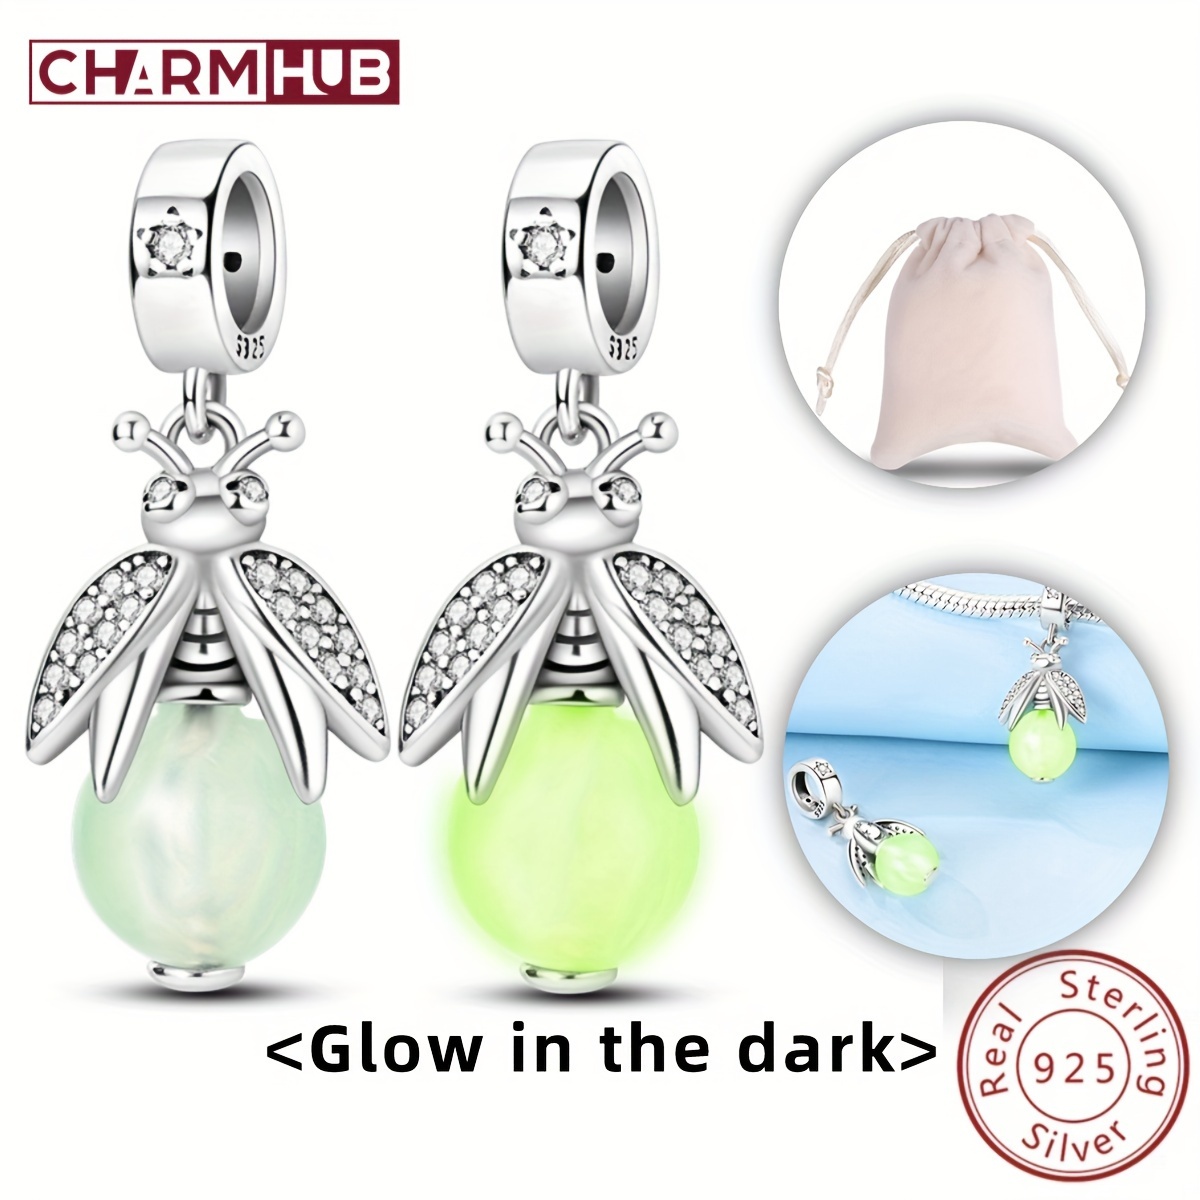 Glow-in-the-dark Firefly Dangle Charm Pendant Beads fit Charms